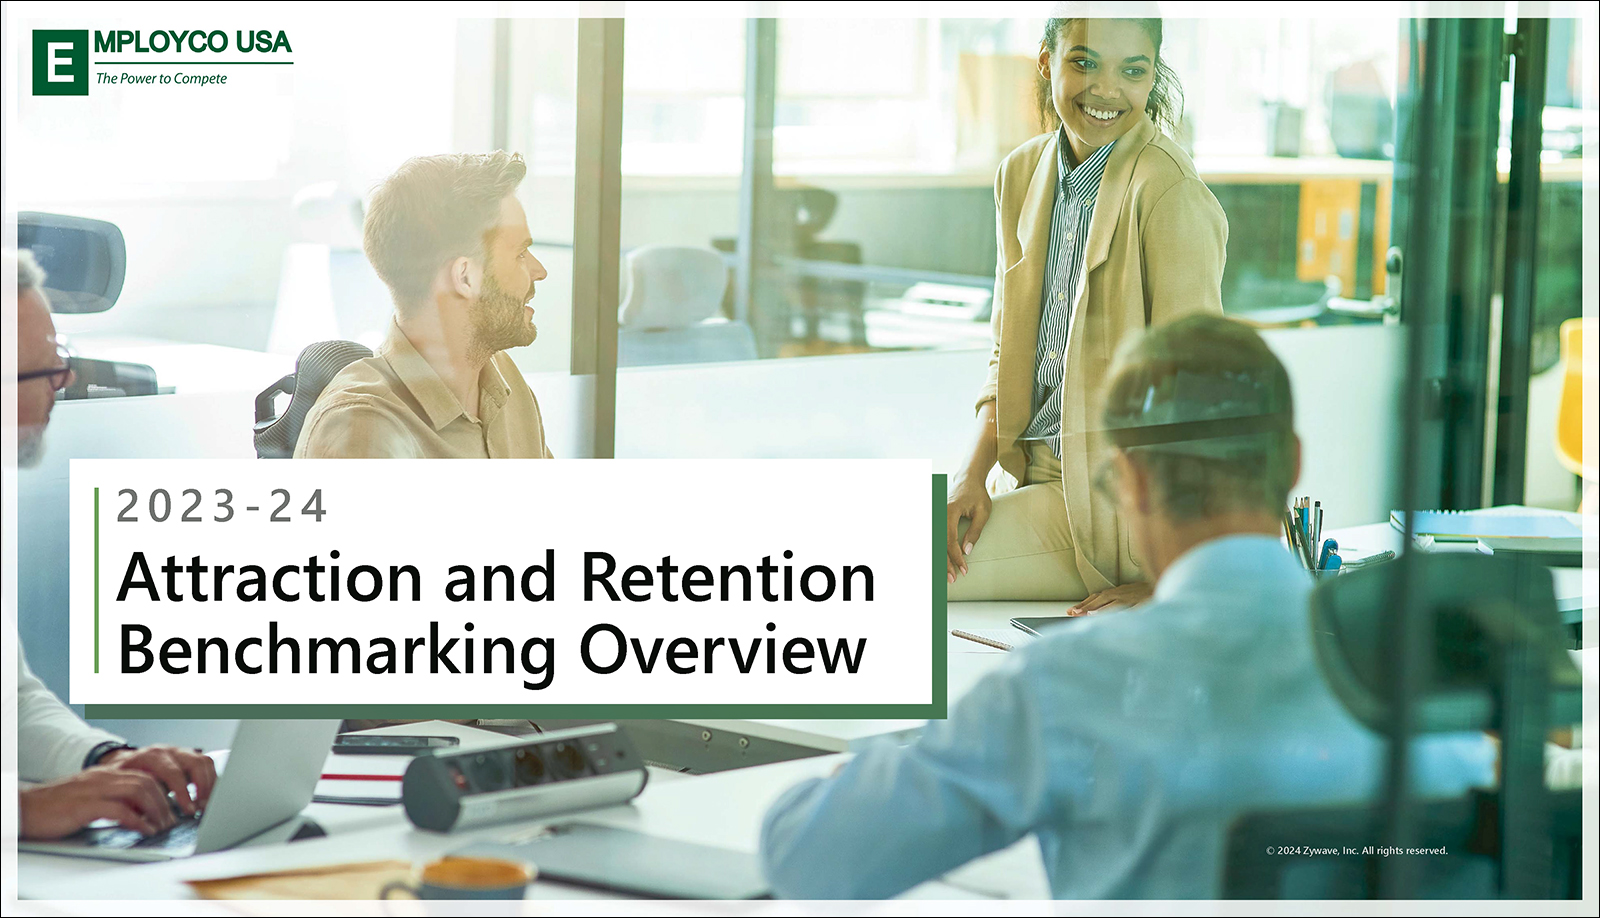 2023-2024 Attraction and Retention Benchmarking Overview